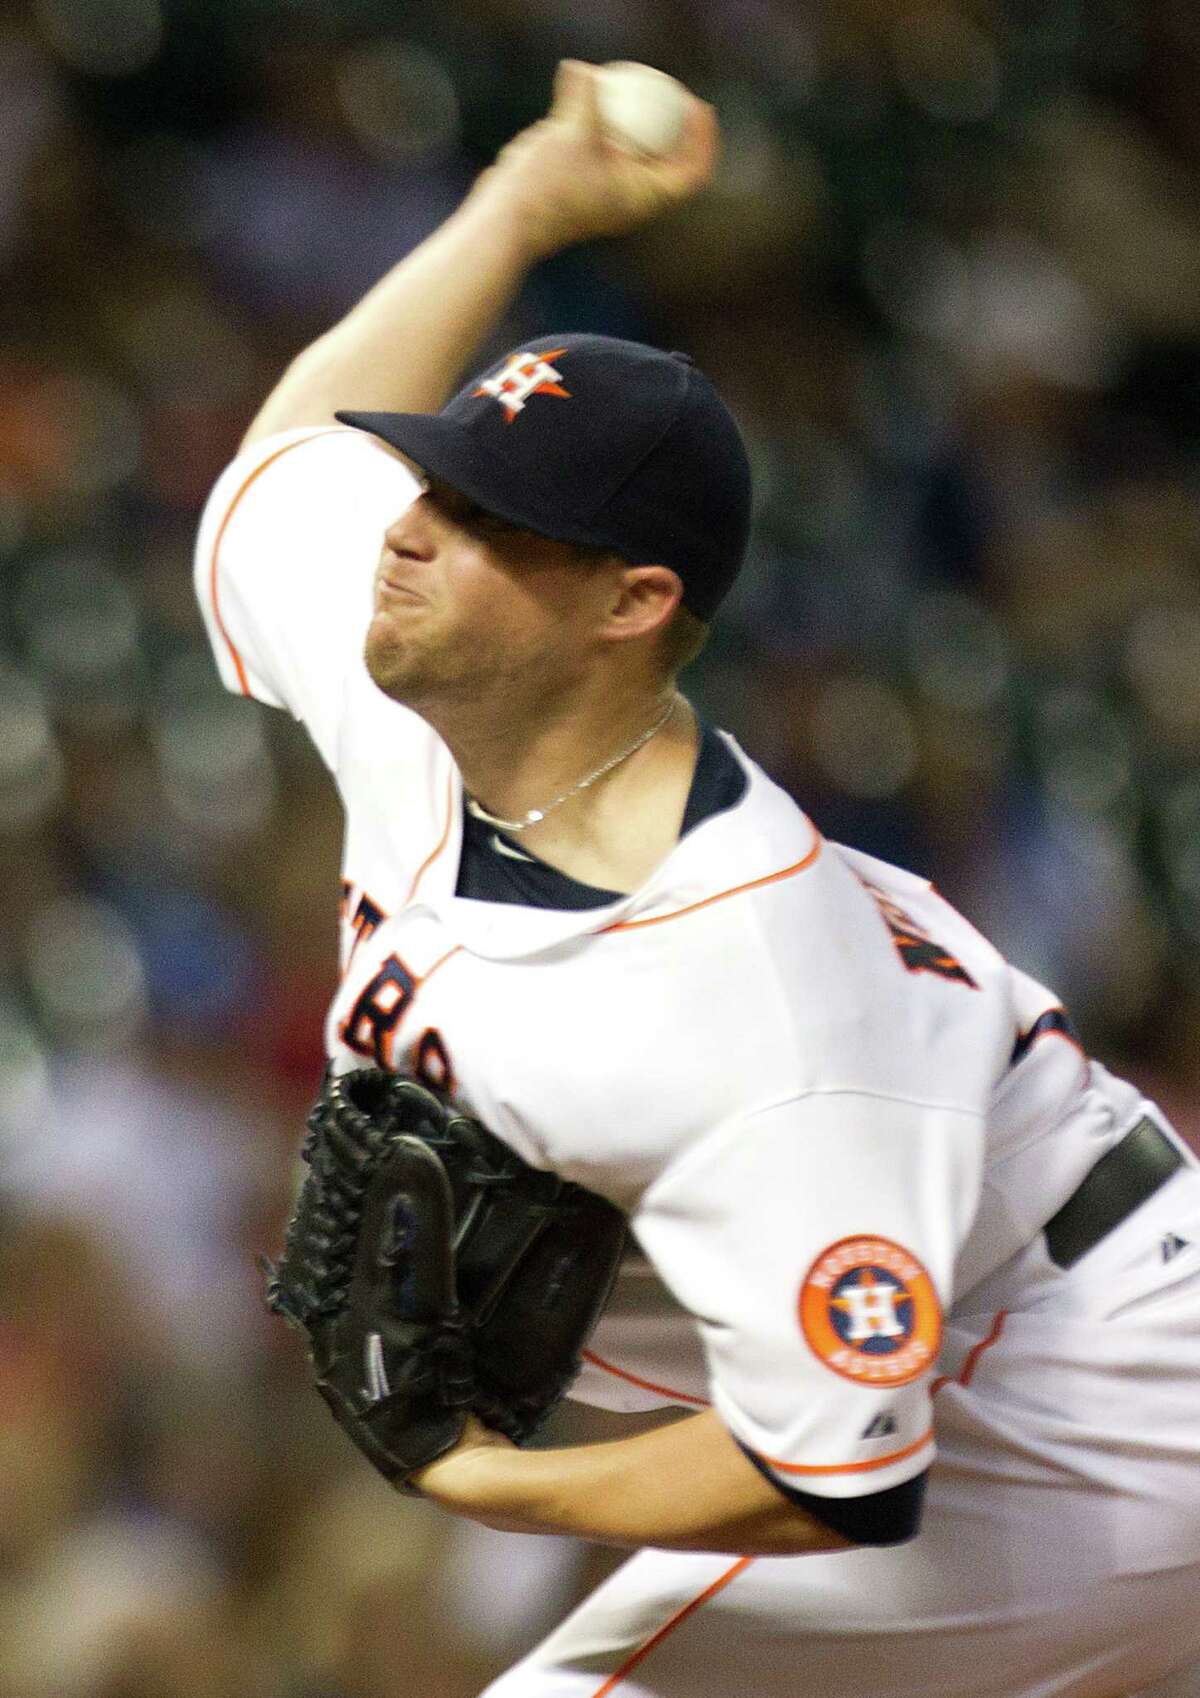 Righthander Bud Norris turned in another quality start for the Astros on Wednesday night, allowing six hits and one run while striking out five Rays batters and walking three during a seven-inning stint.